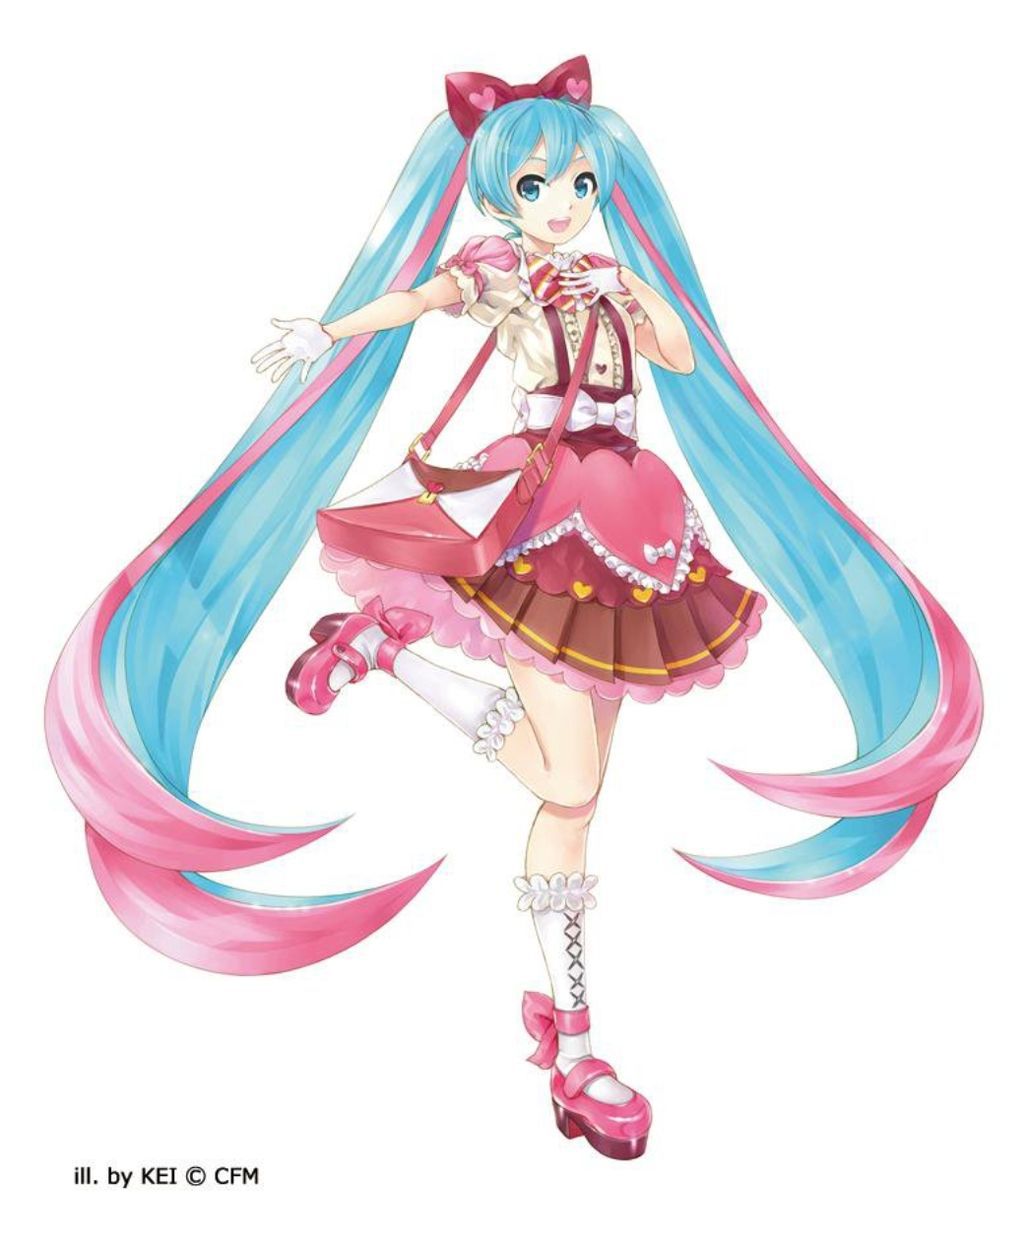 Vocaloid Image that is becoming the Iki face of Hatsune Miku 15